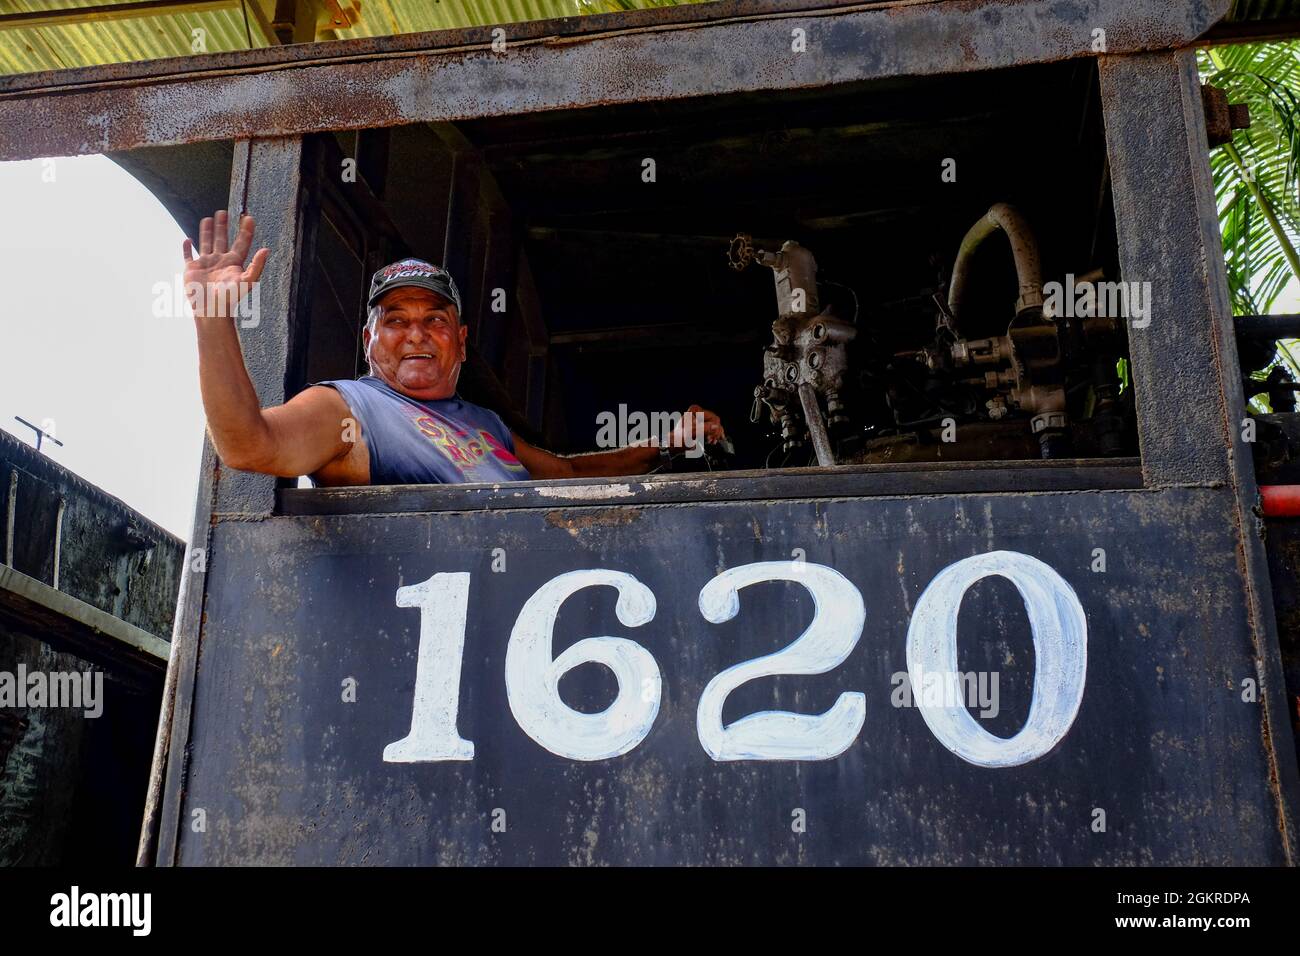 A smiling man waves from the engine of a train, Cienfuegos, Cuba, West Indies, Central America Stock Photo